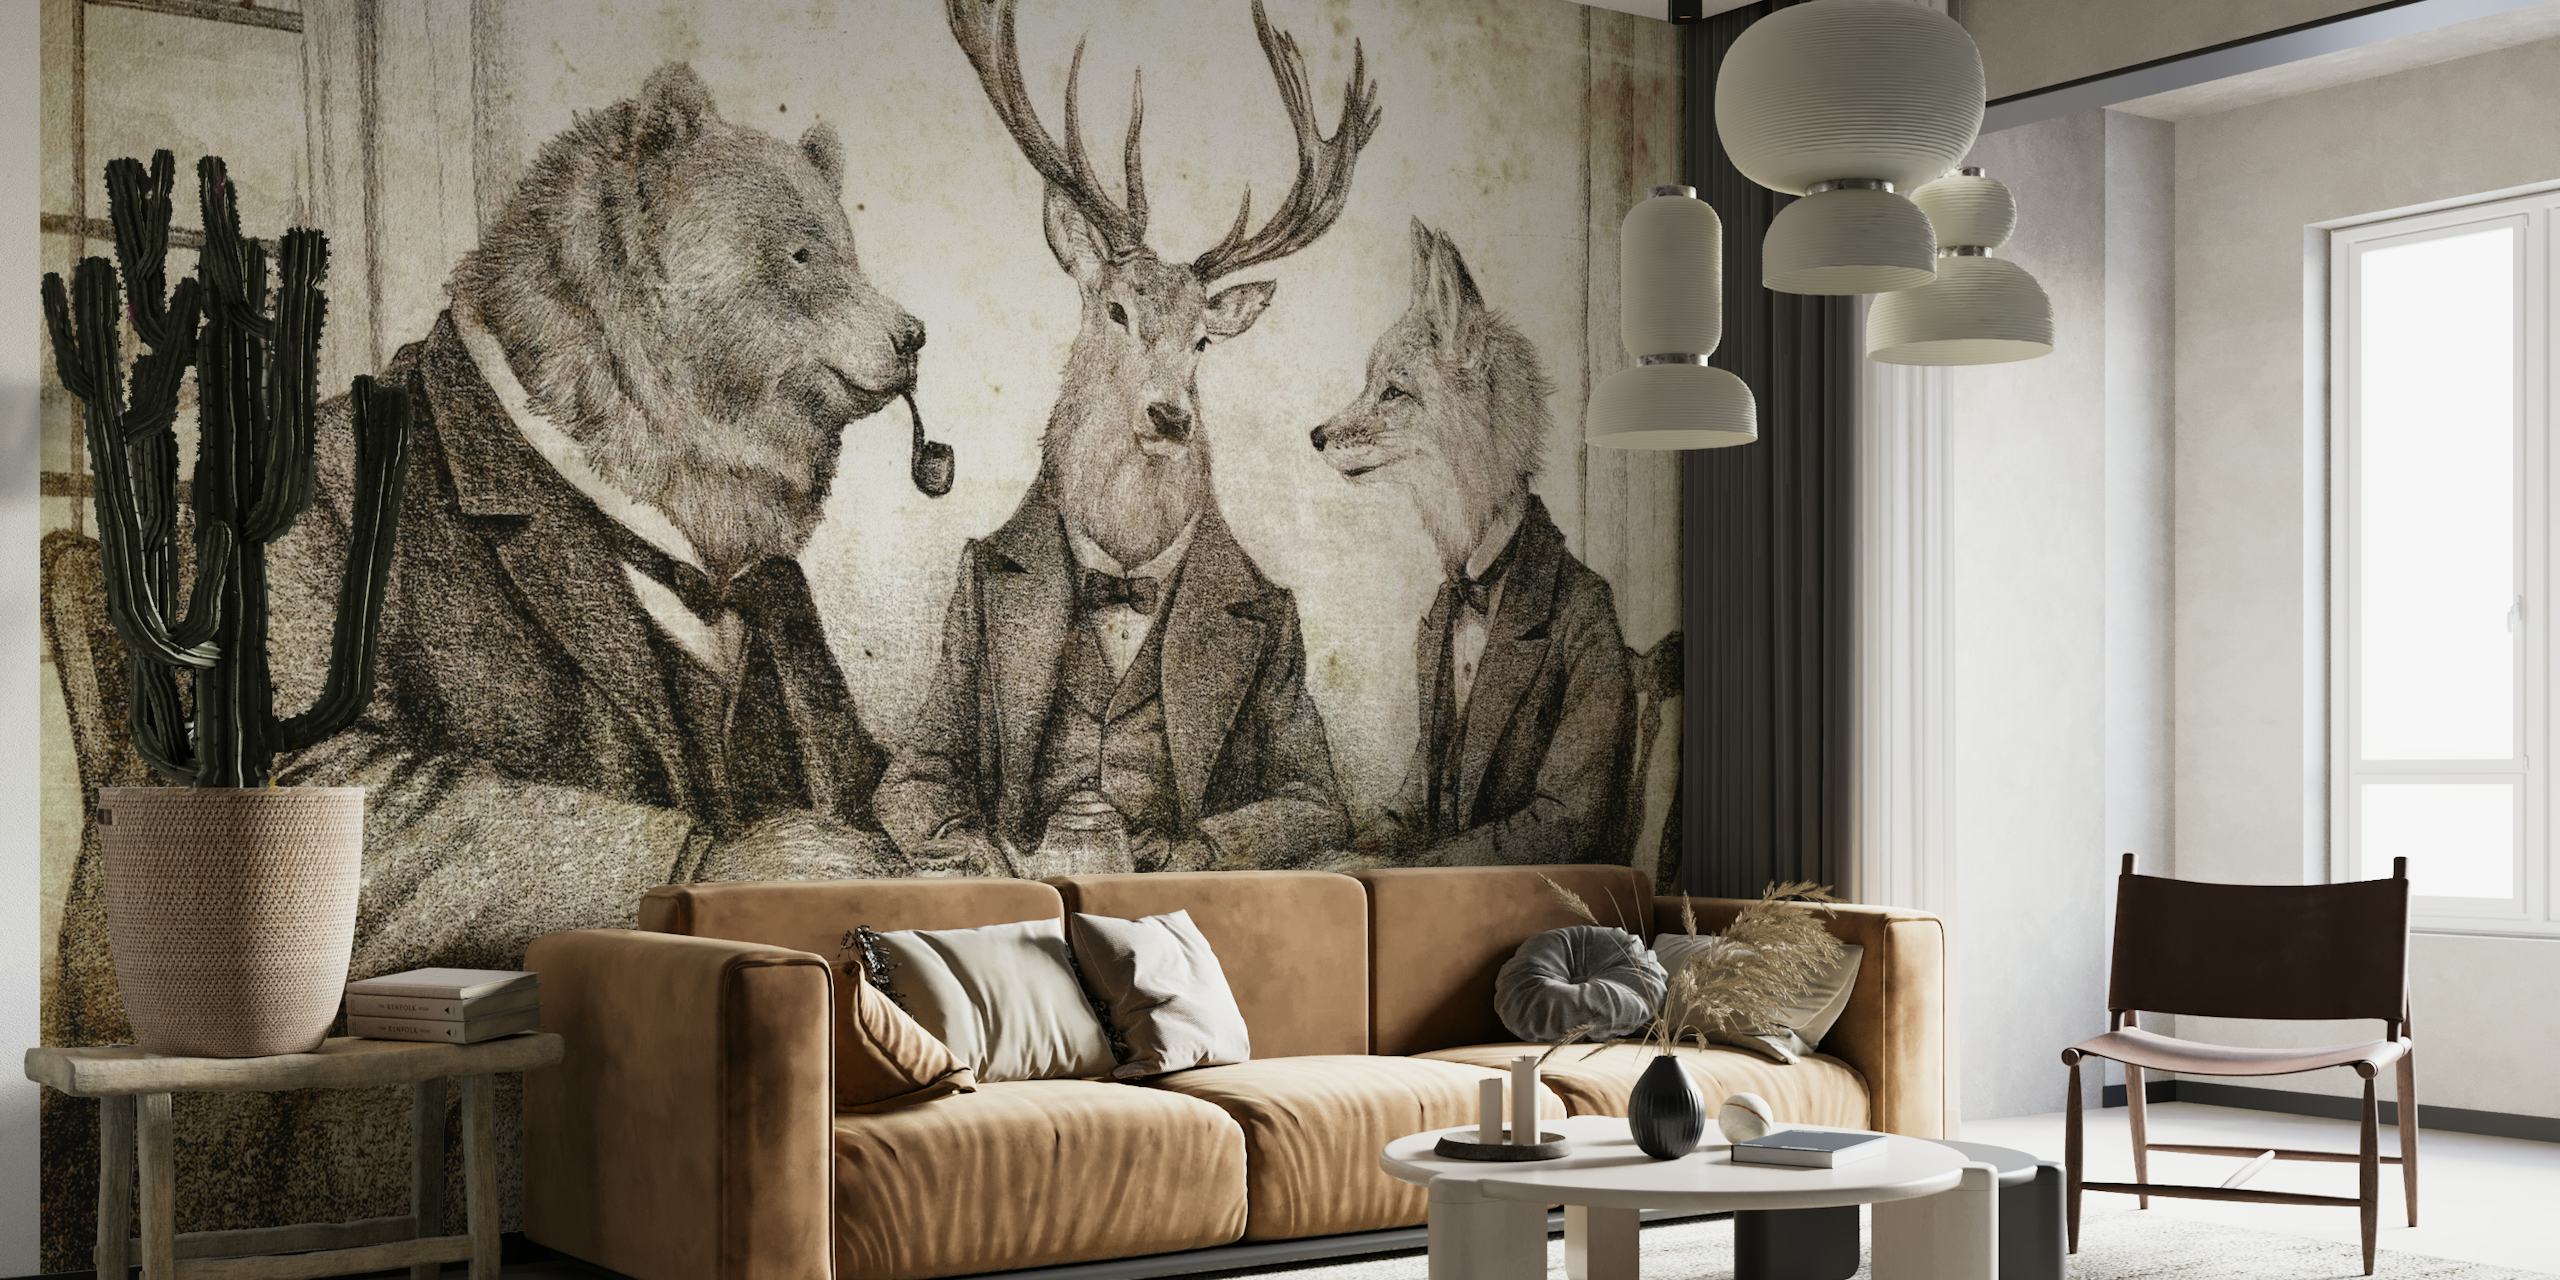 Vintage-style black and white wall mural of animals in human attire having tea